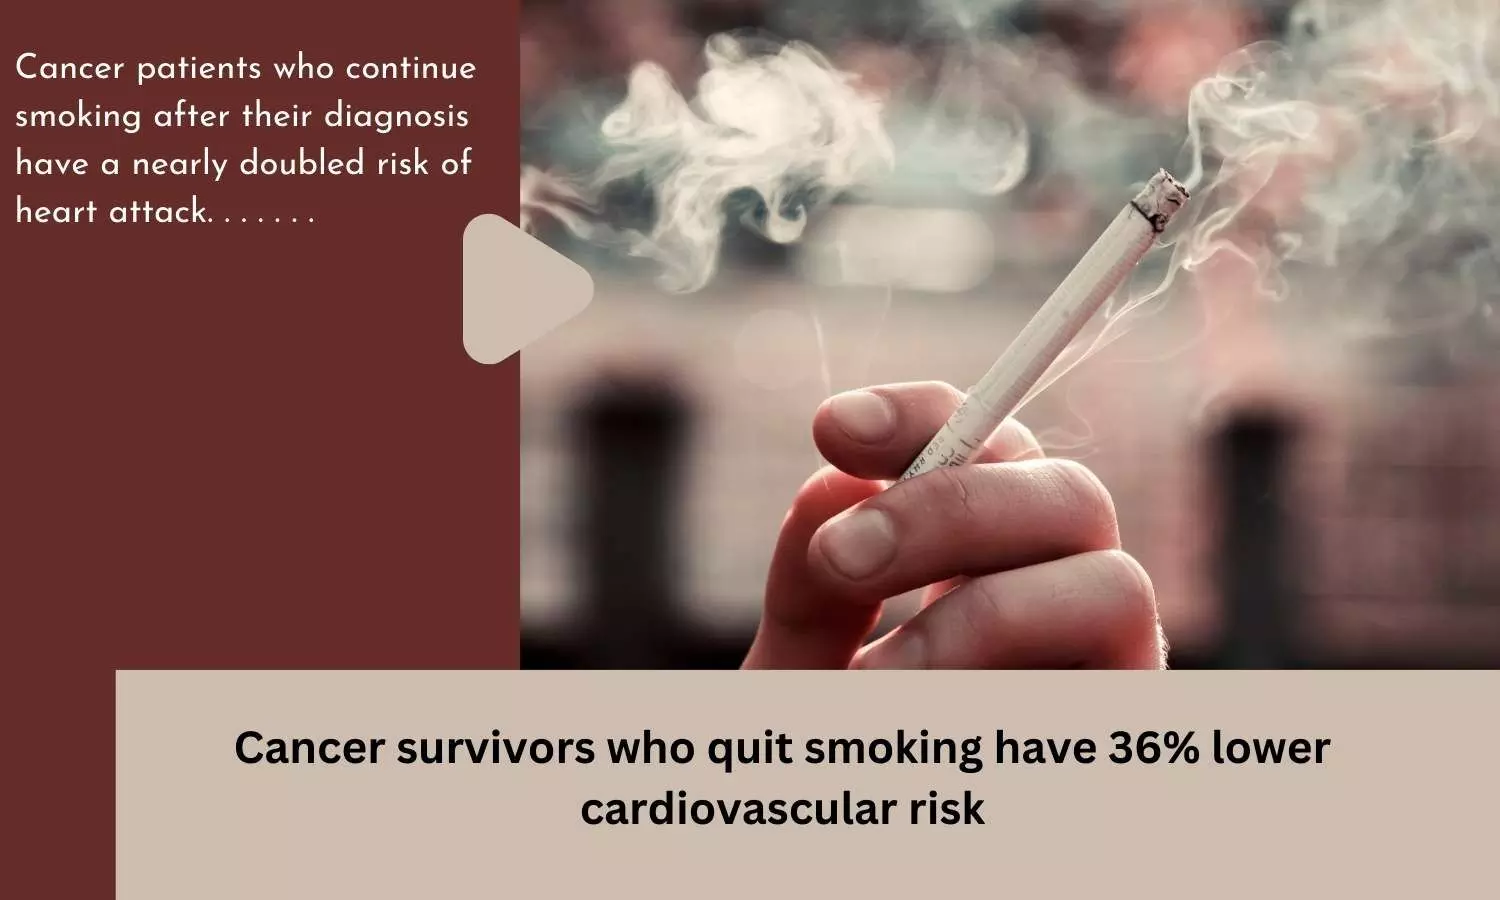 Cancer survivors who quit smoking have 36% lower cardiovascular risk